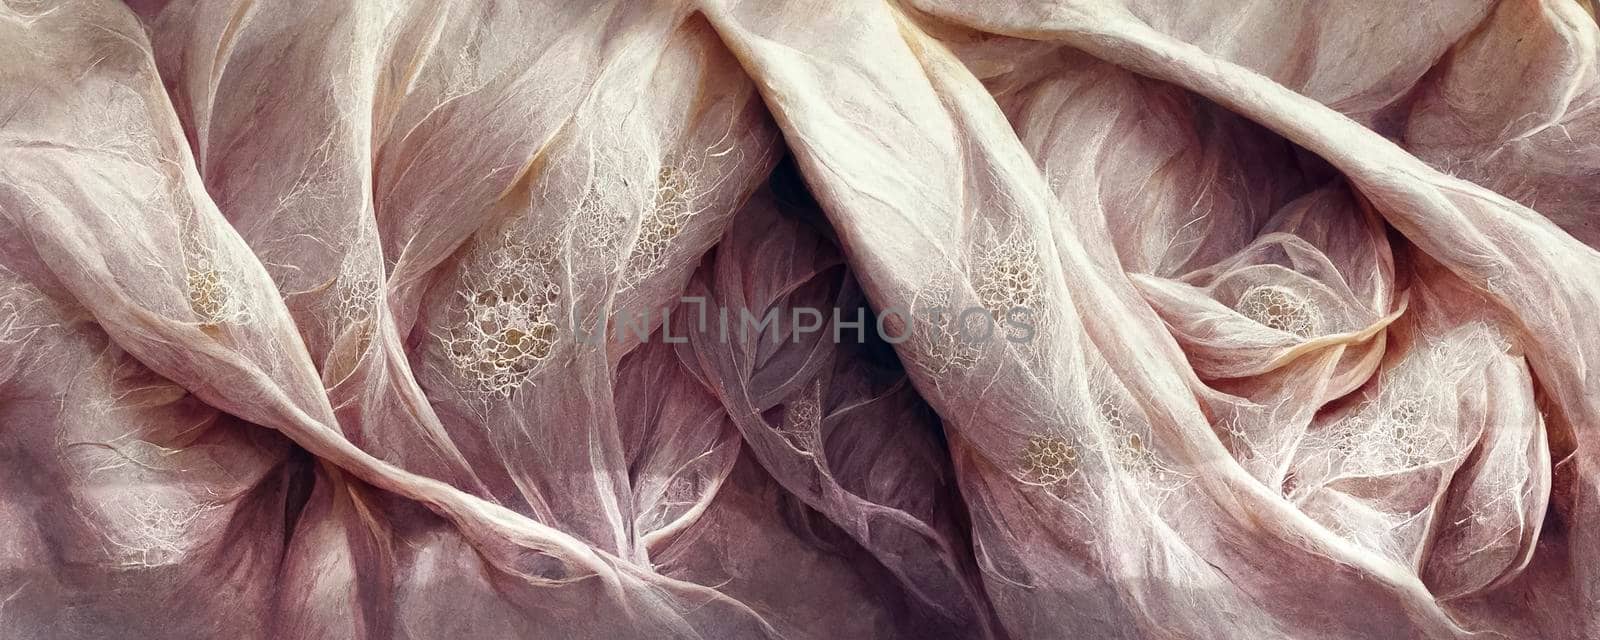 Silk wavy composition. Abstract texture of silk chiffon fabric in champagne color. Silk fabric mockup as artistic layout background